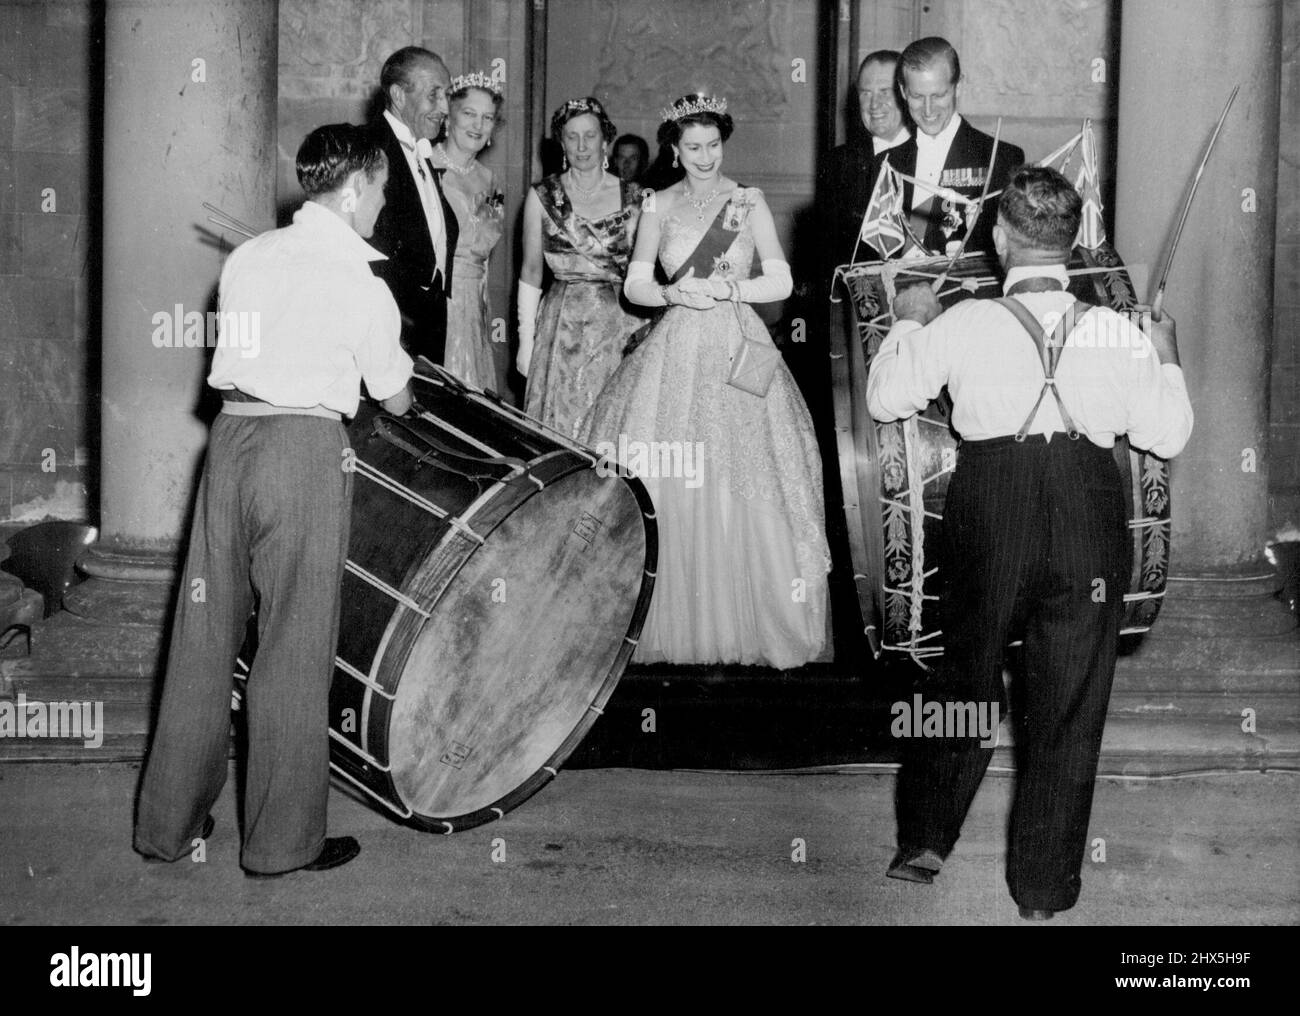 Drums Beat For The Queen. The Queen and the Duke of Edinburgh smile happily as they watch Irish drummers beating outside drums with canes outside Government House. Earlier the Royal couple had arrived at Hillsborough for their three-day visit to Northern Ireland. Standing beside the Queen are, left to rights Viscount Brookeborough, Prime Minister of Northern Ireland, Lady Wakehurst, wife of the Governor, and Lady Brookeborough. July 2, 1953. (Photo by Planet News Ltd.). Stock Photo